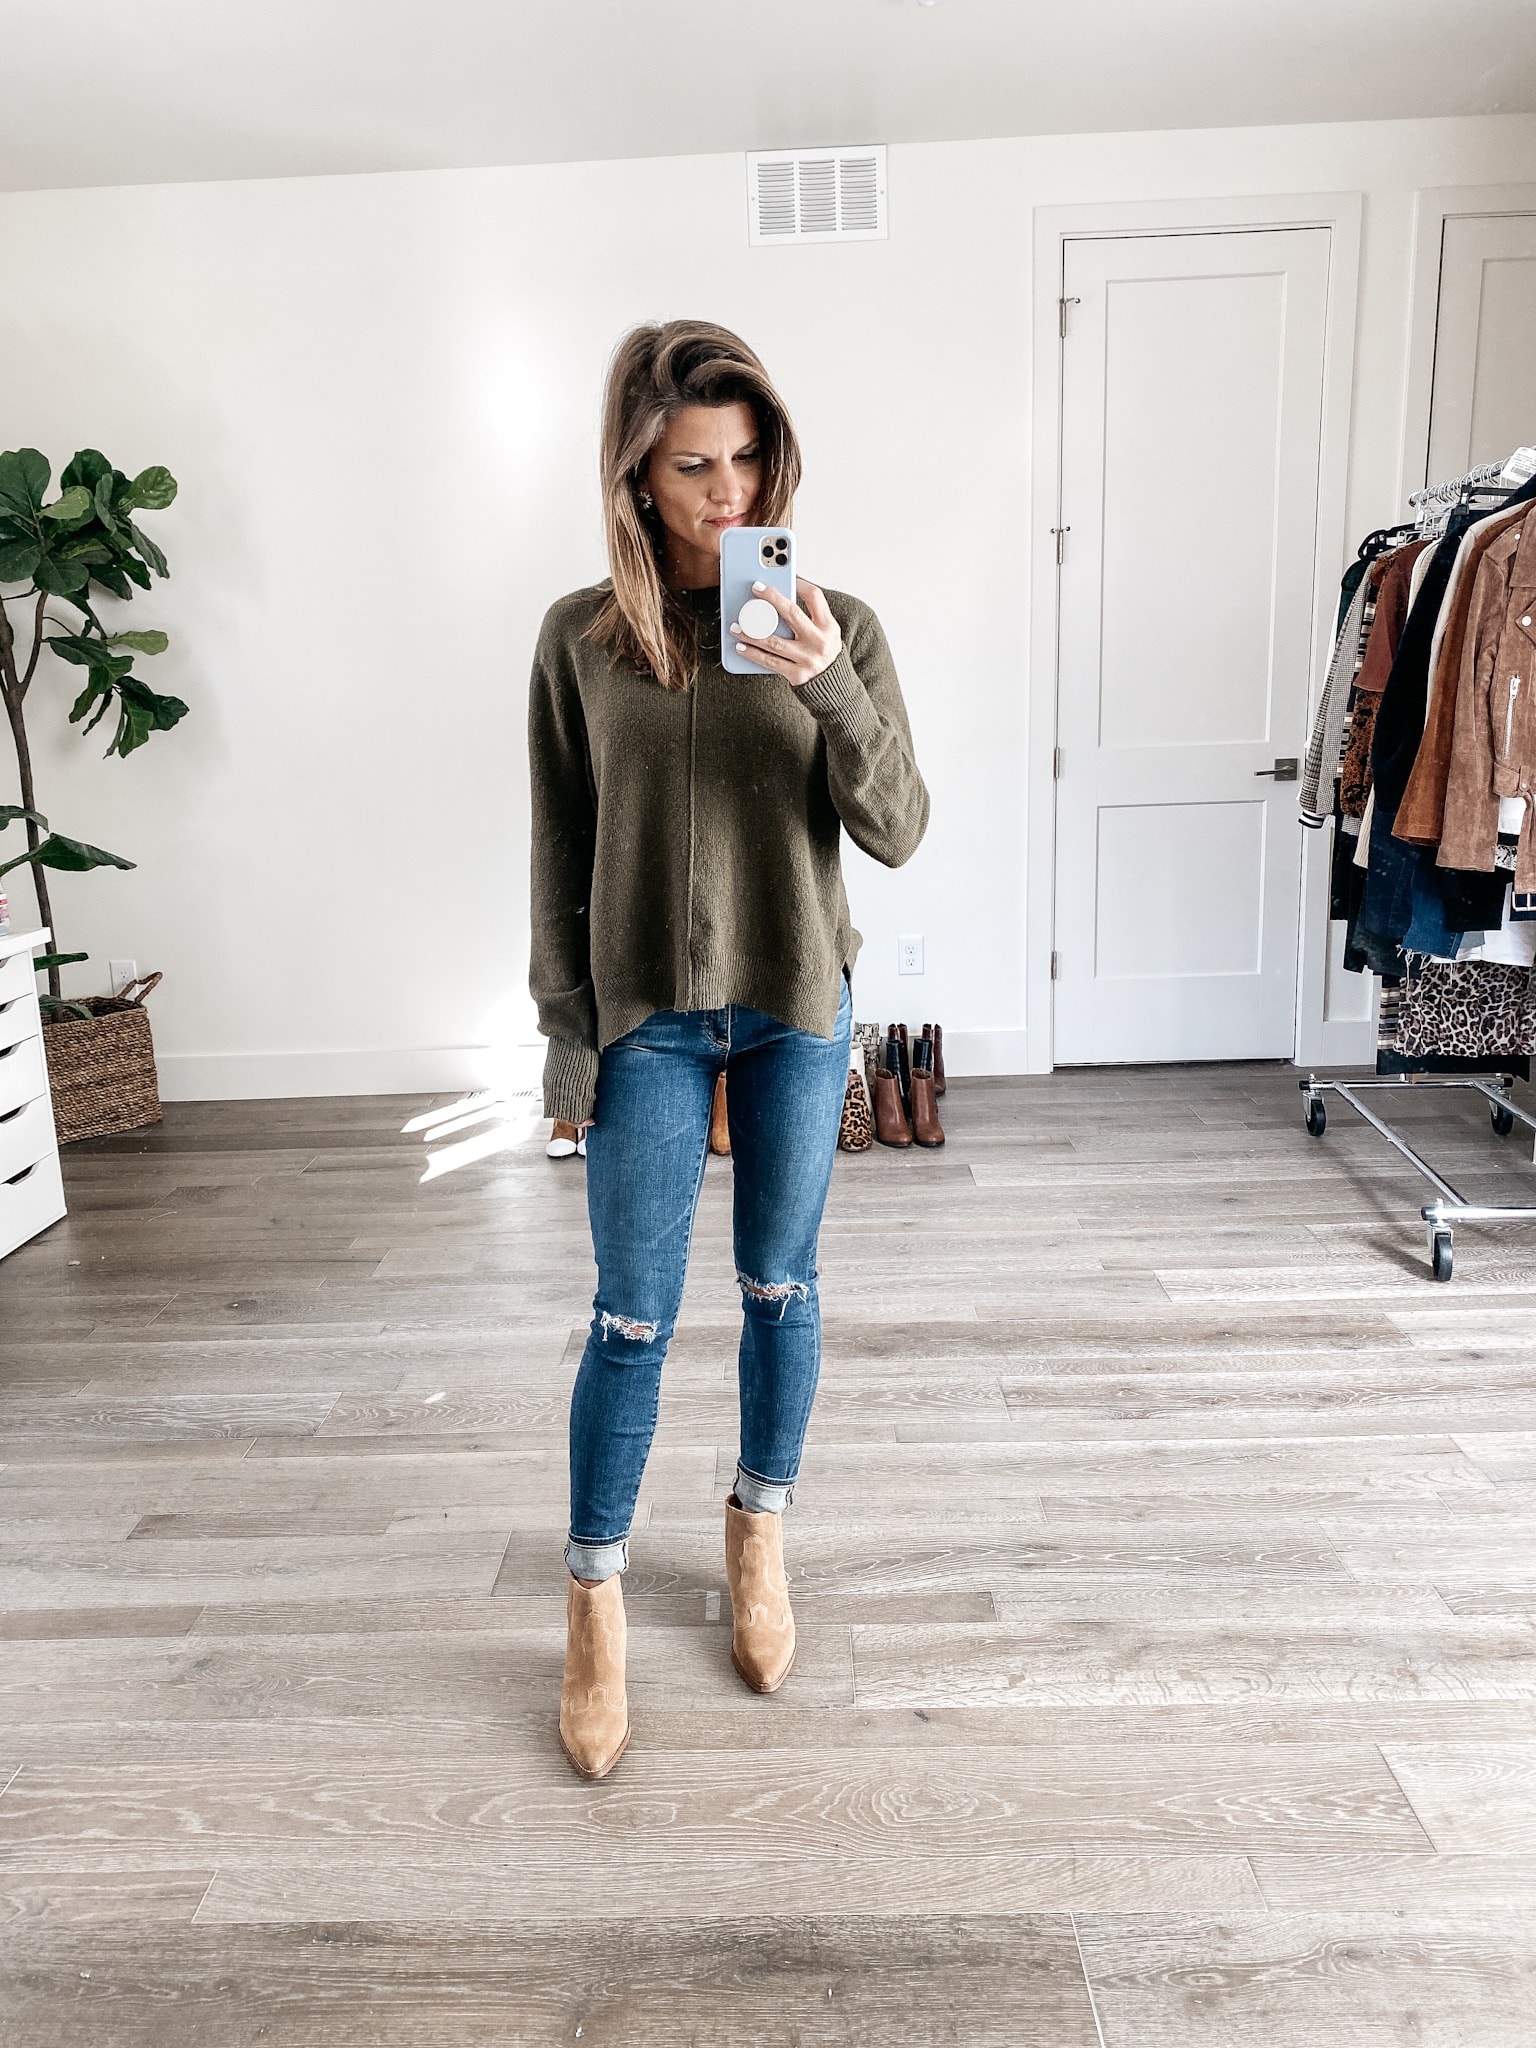 Buy Gray Booties Outfit In Stock